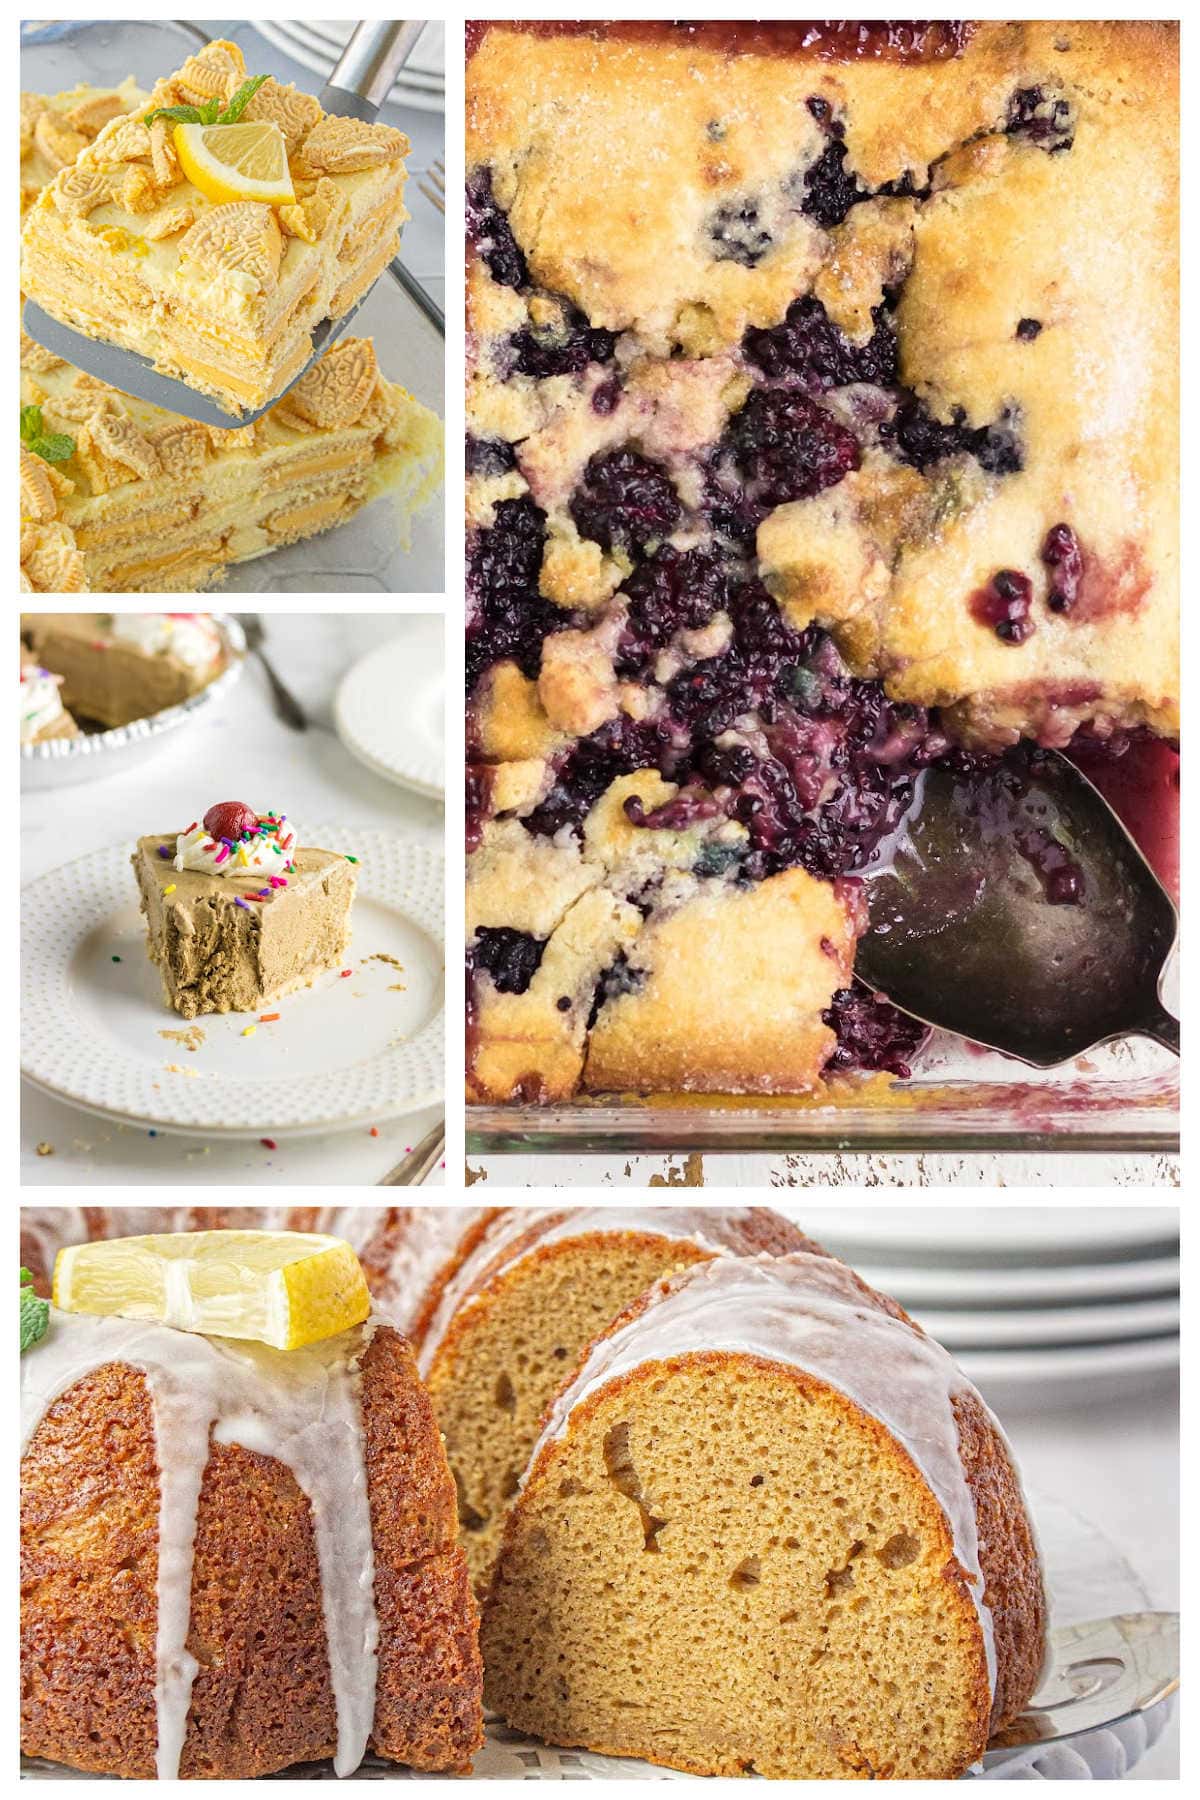 A collage of desserts that would be good with bbq and at backyard cookouts.